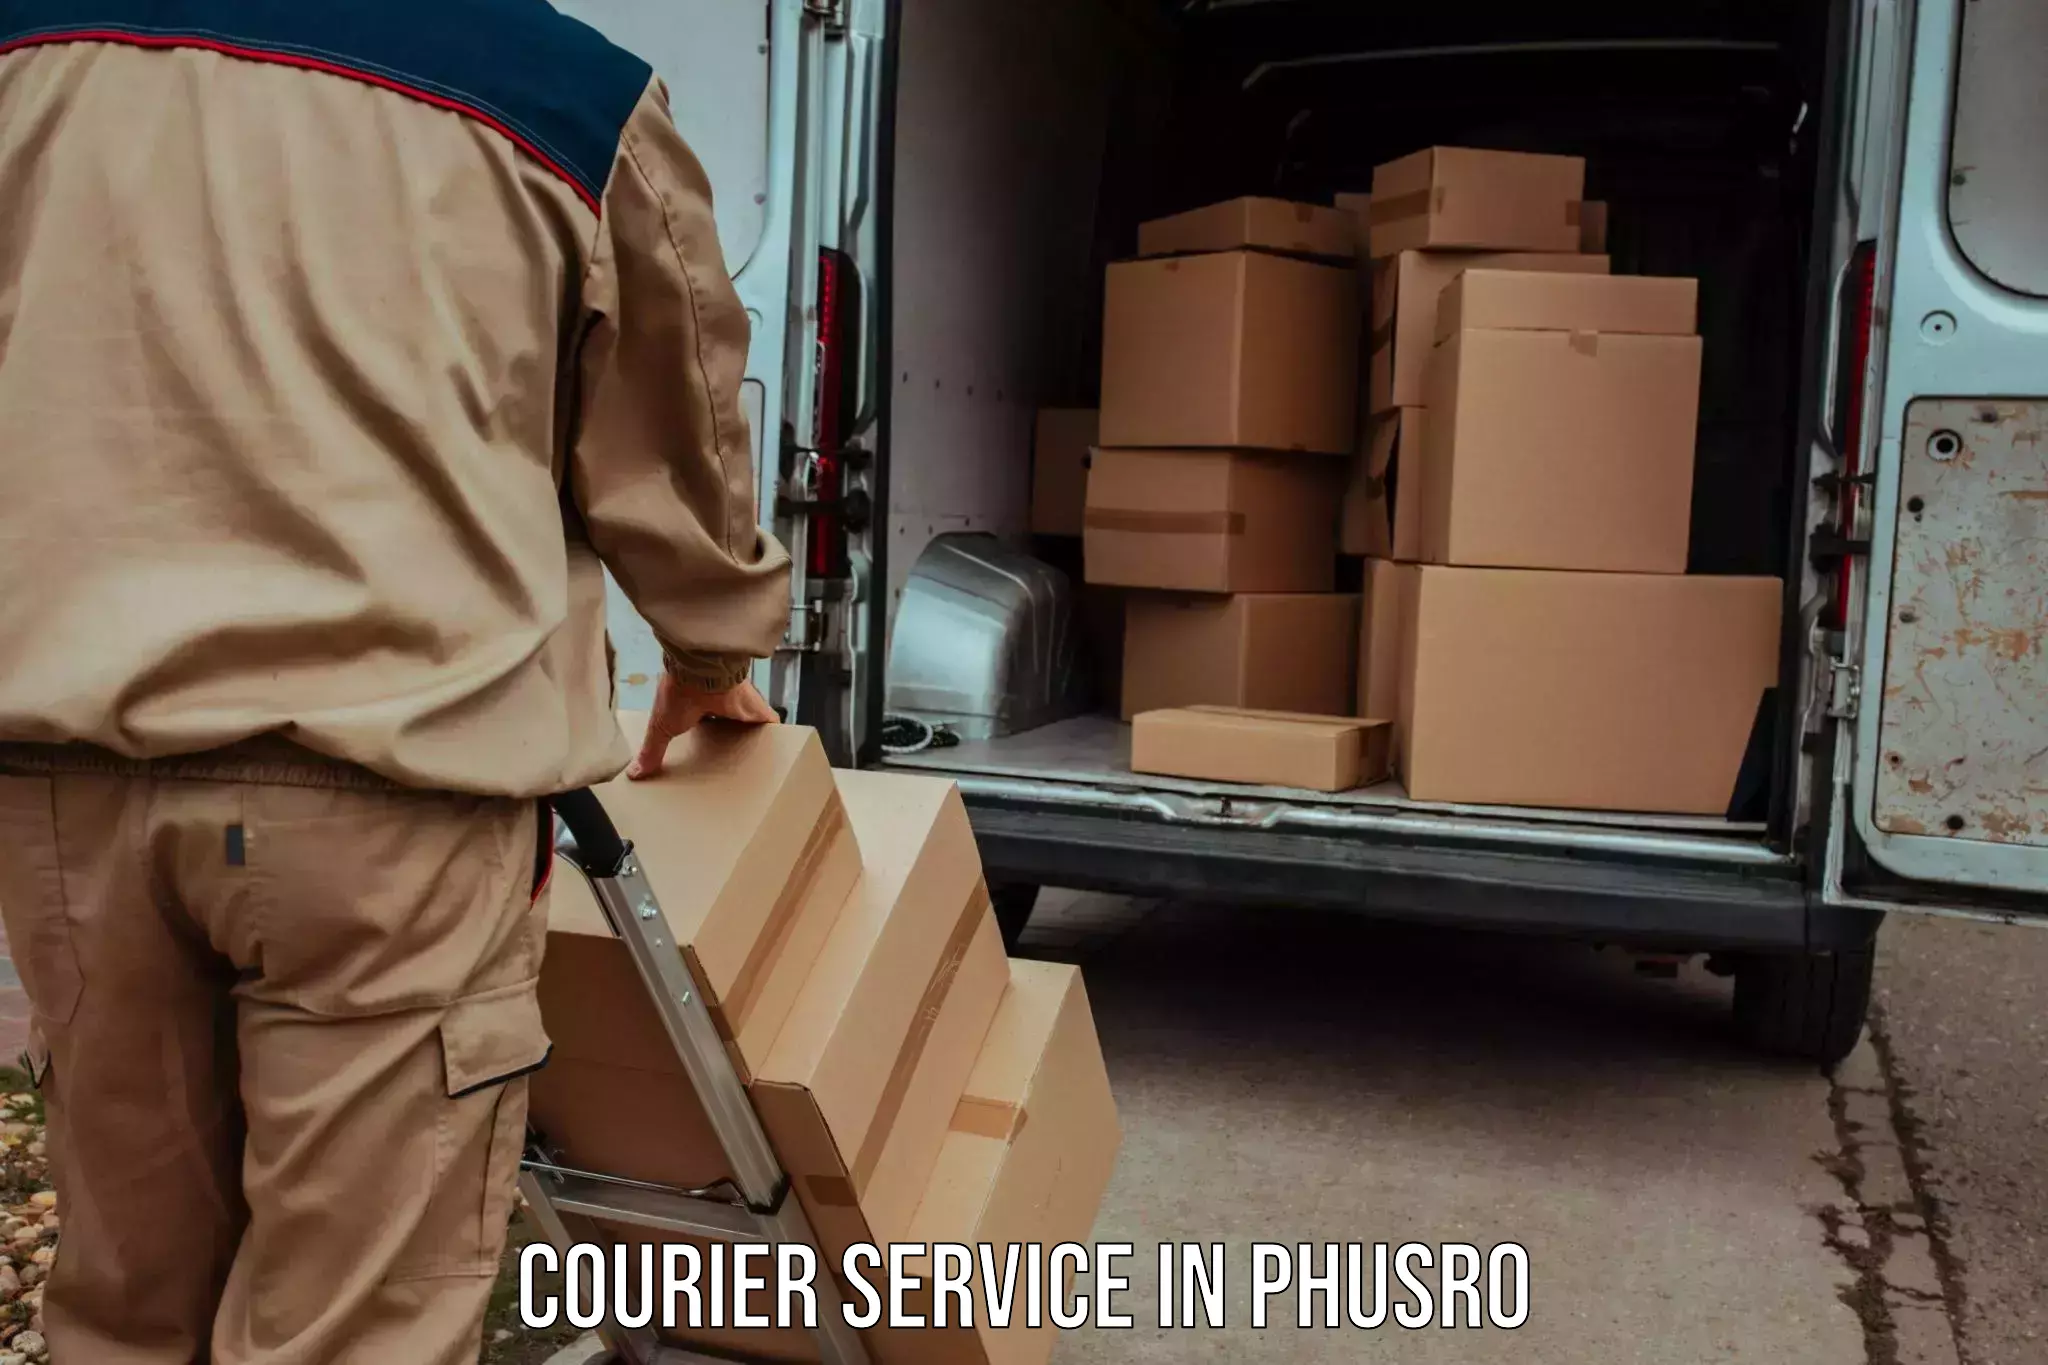 State-of-the-art courier technology in Phusro